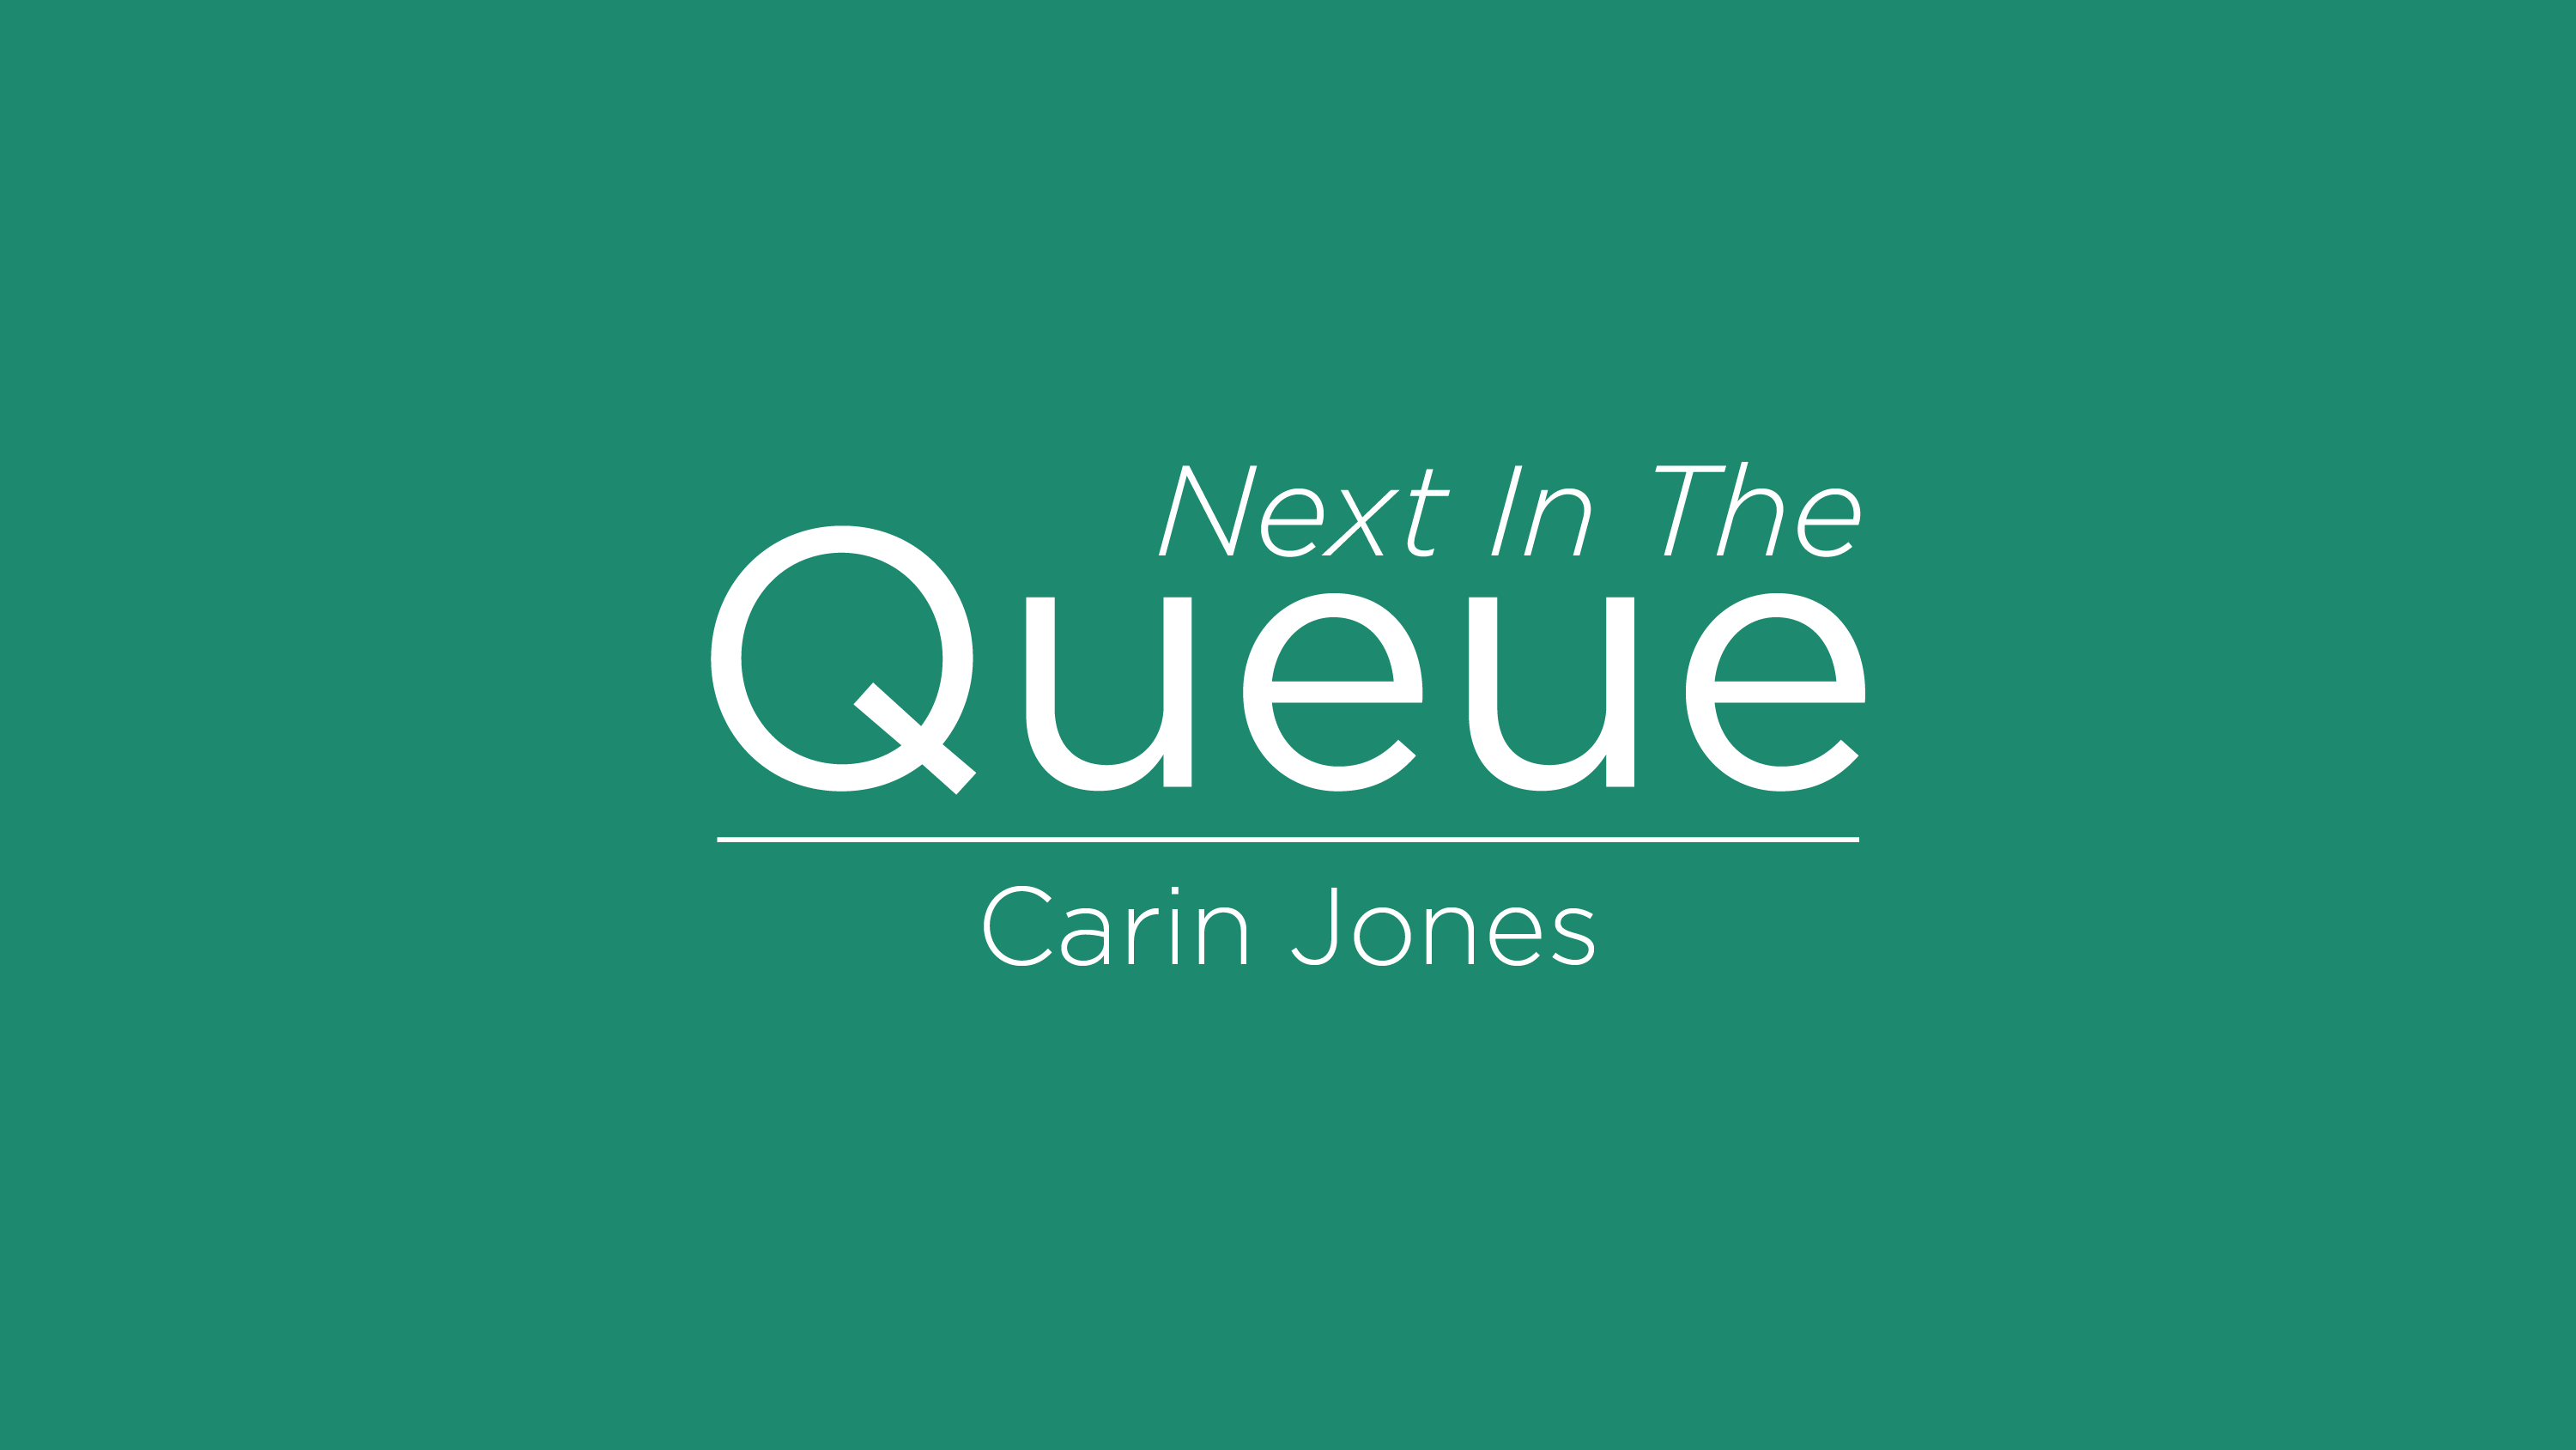 blog post cover graphic for The Queue featuring Carin Jones